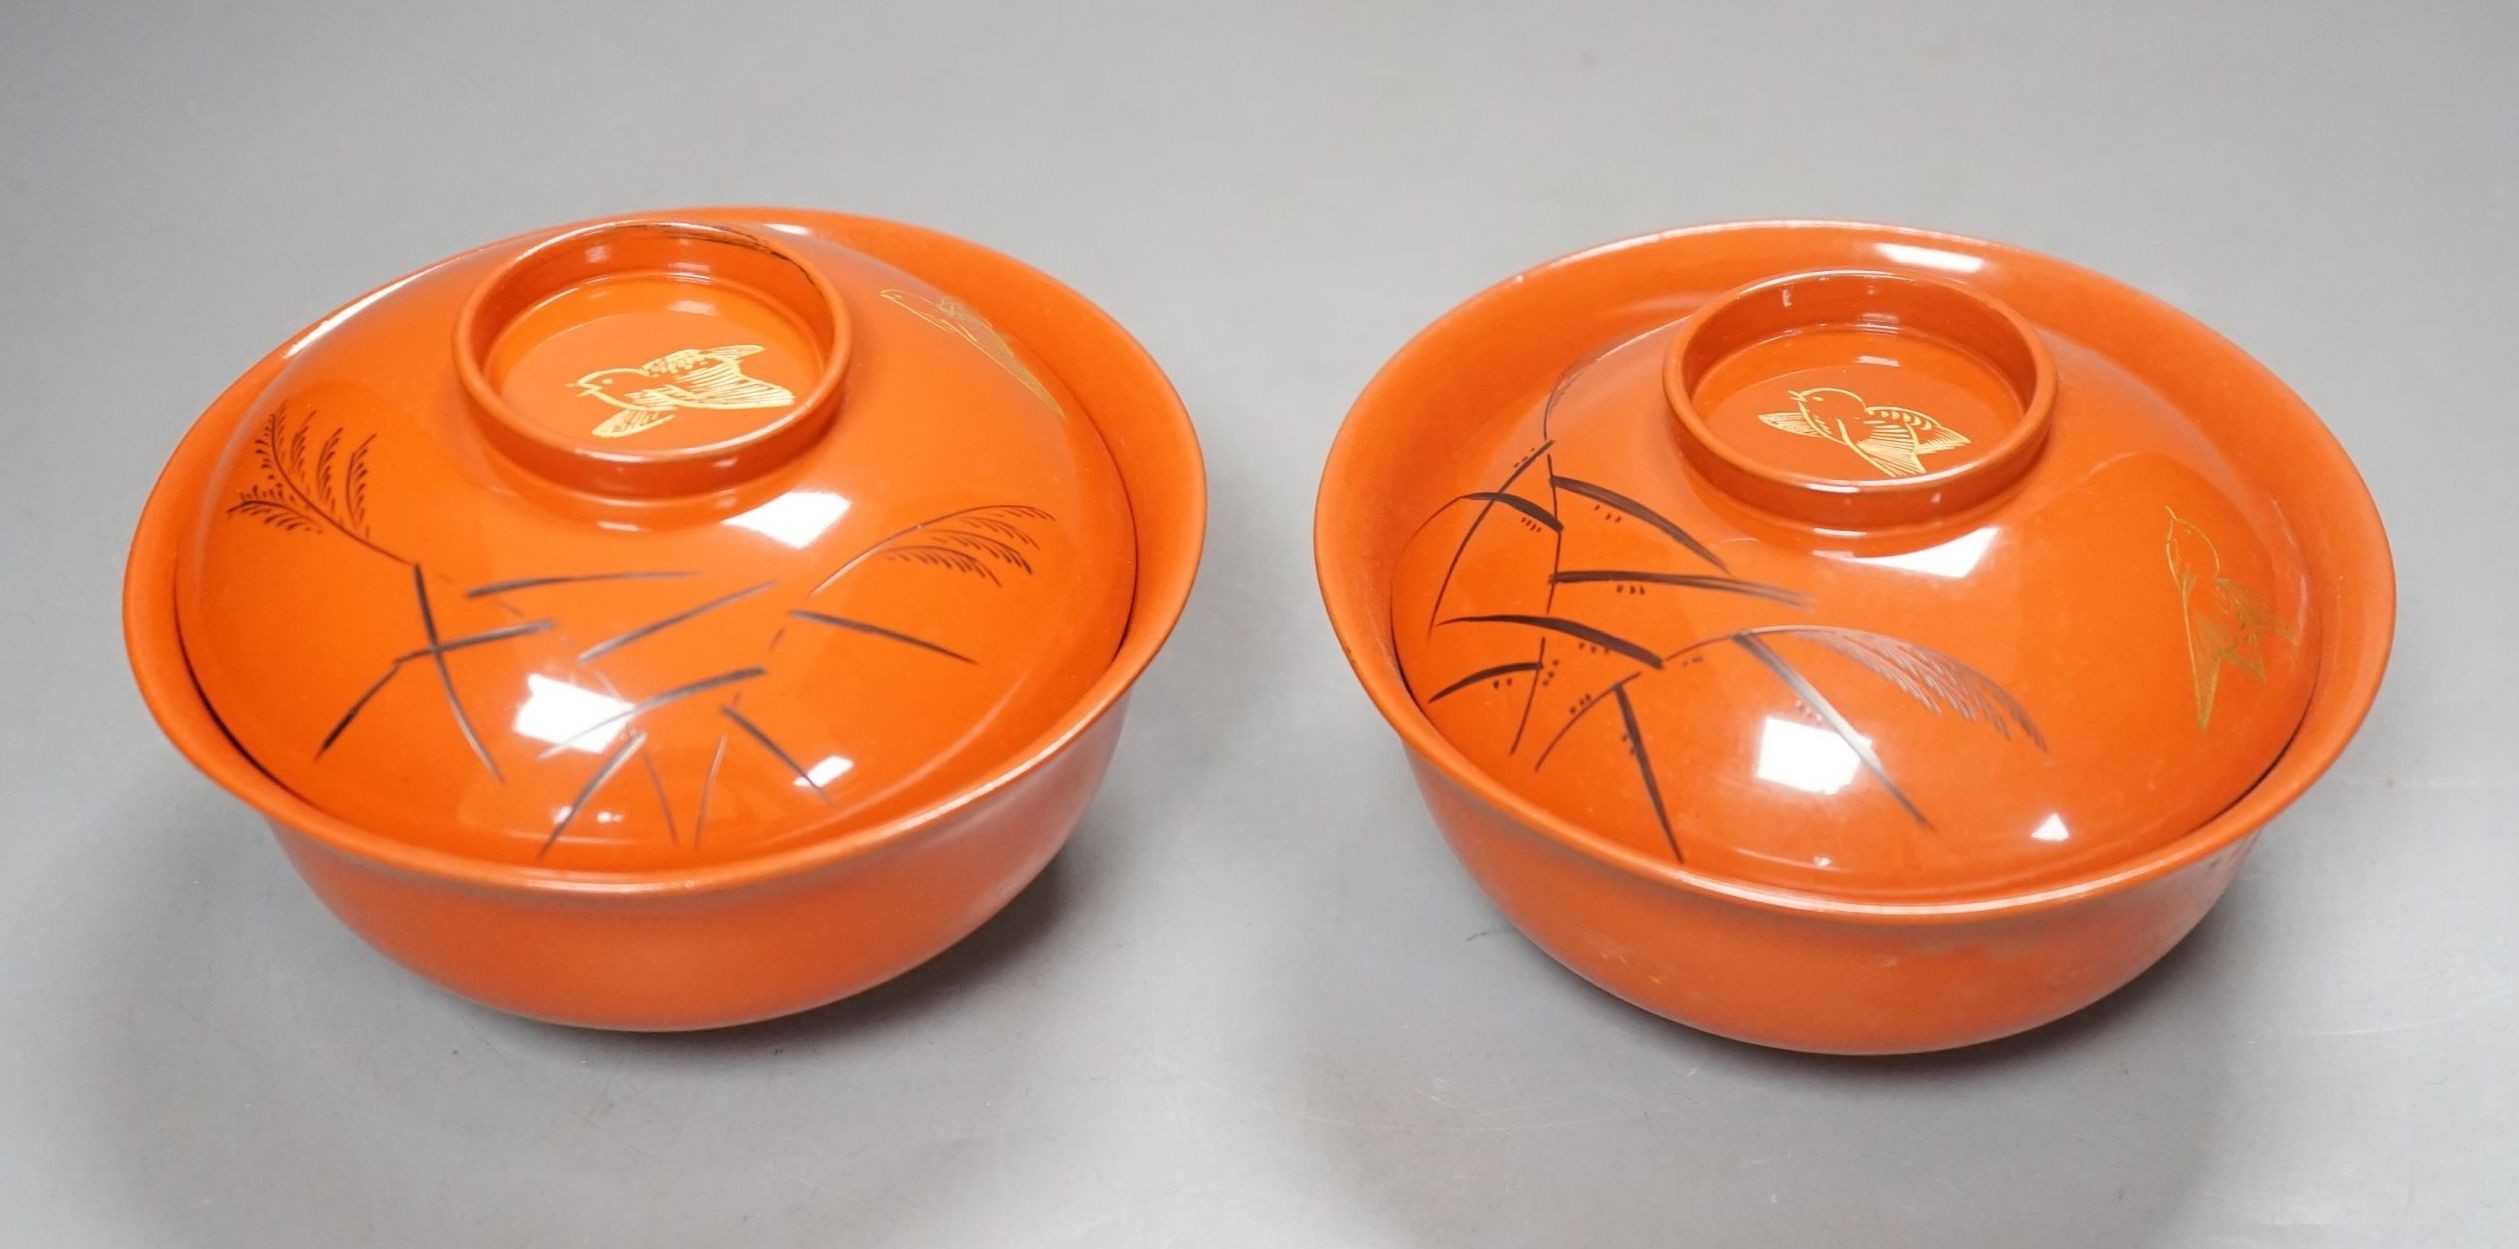 Two sets of Japanese lacquer bowls and covers, 20th century